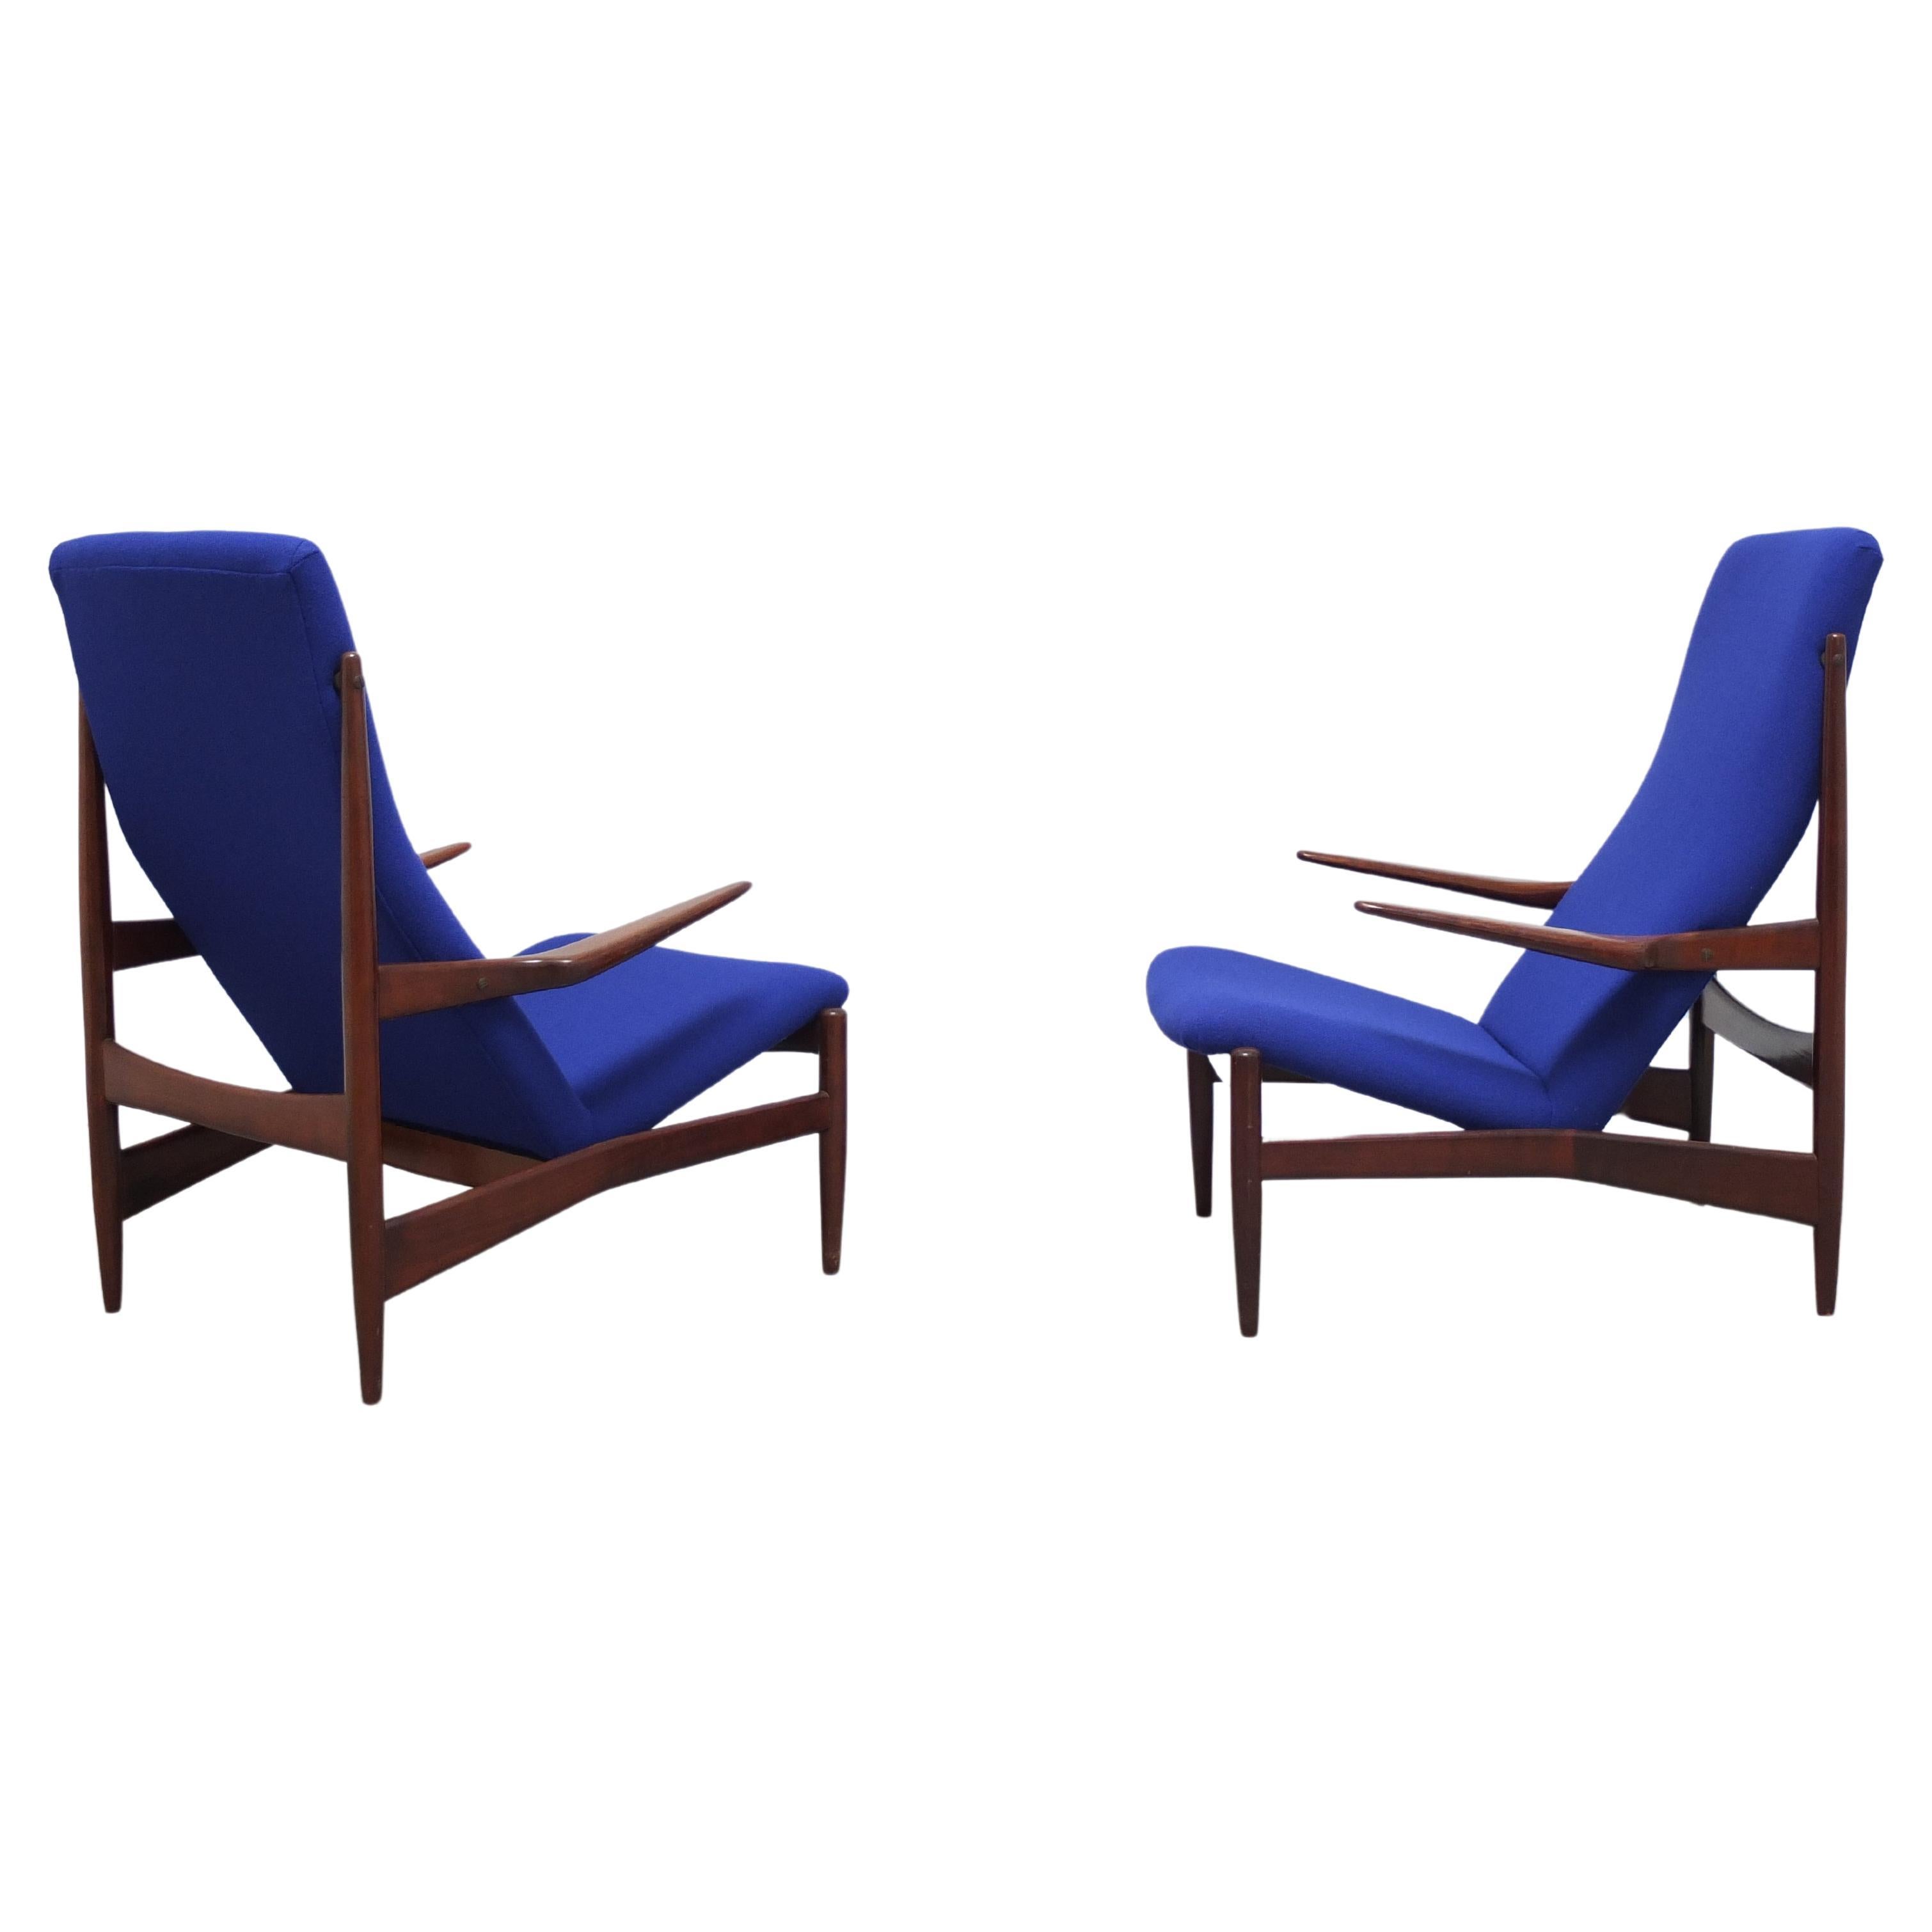 Rare Pair of Lounge Chairs by Alfred Hendrickx for Belform, 1950s